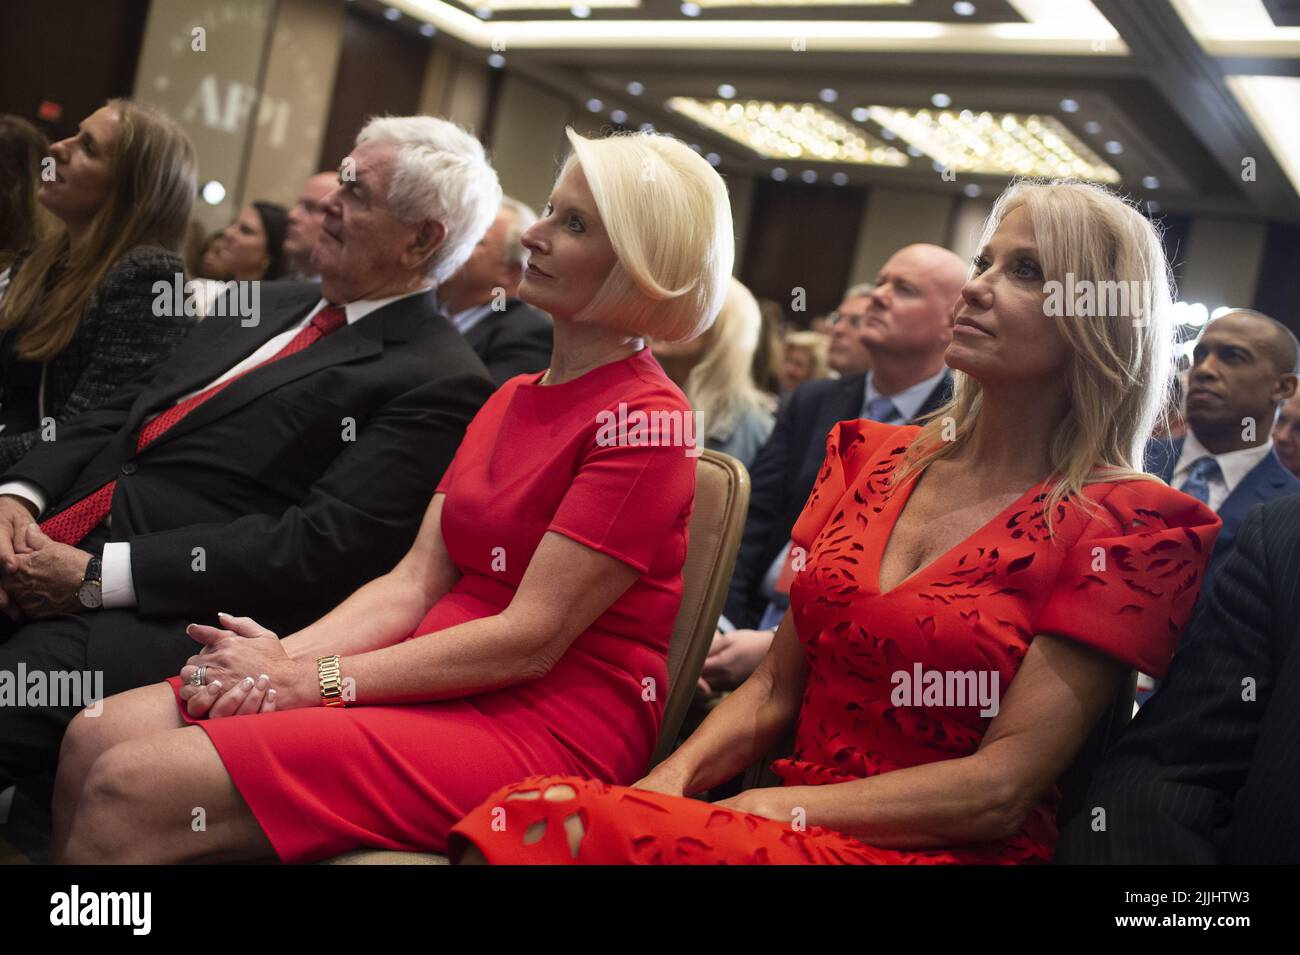 Washington, United States. 26th July, 2022. Former Speaker of the House Newt Gingrich, left, and Kellyanne Conaway, right, look on as Former President of the United States Donald Trump speaks during his first trip back to Washington, DC at the American First Agenda Summit held by the America First Policy Institute at the Marriott Marquis Hotel in Washington, DC on Tuesday, July 26, 2022. Photo by Bonnie Cash/UPI Credit: UPI/Alamy Live News Stock Photo